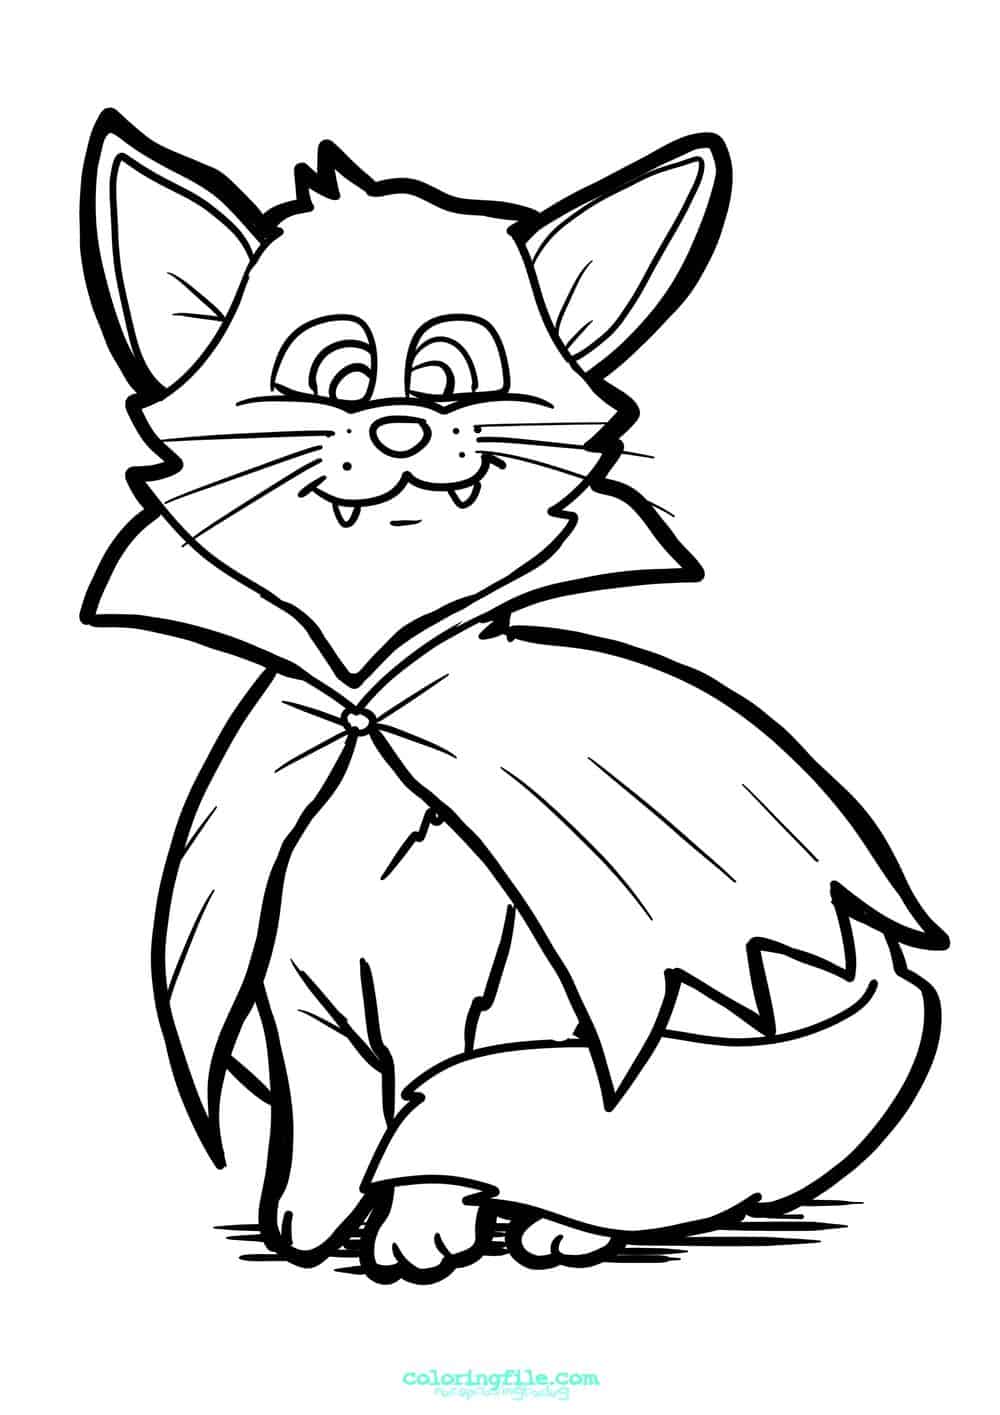 Halloween vampire cat coloring pages